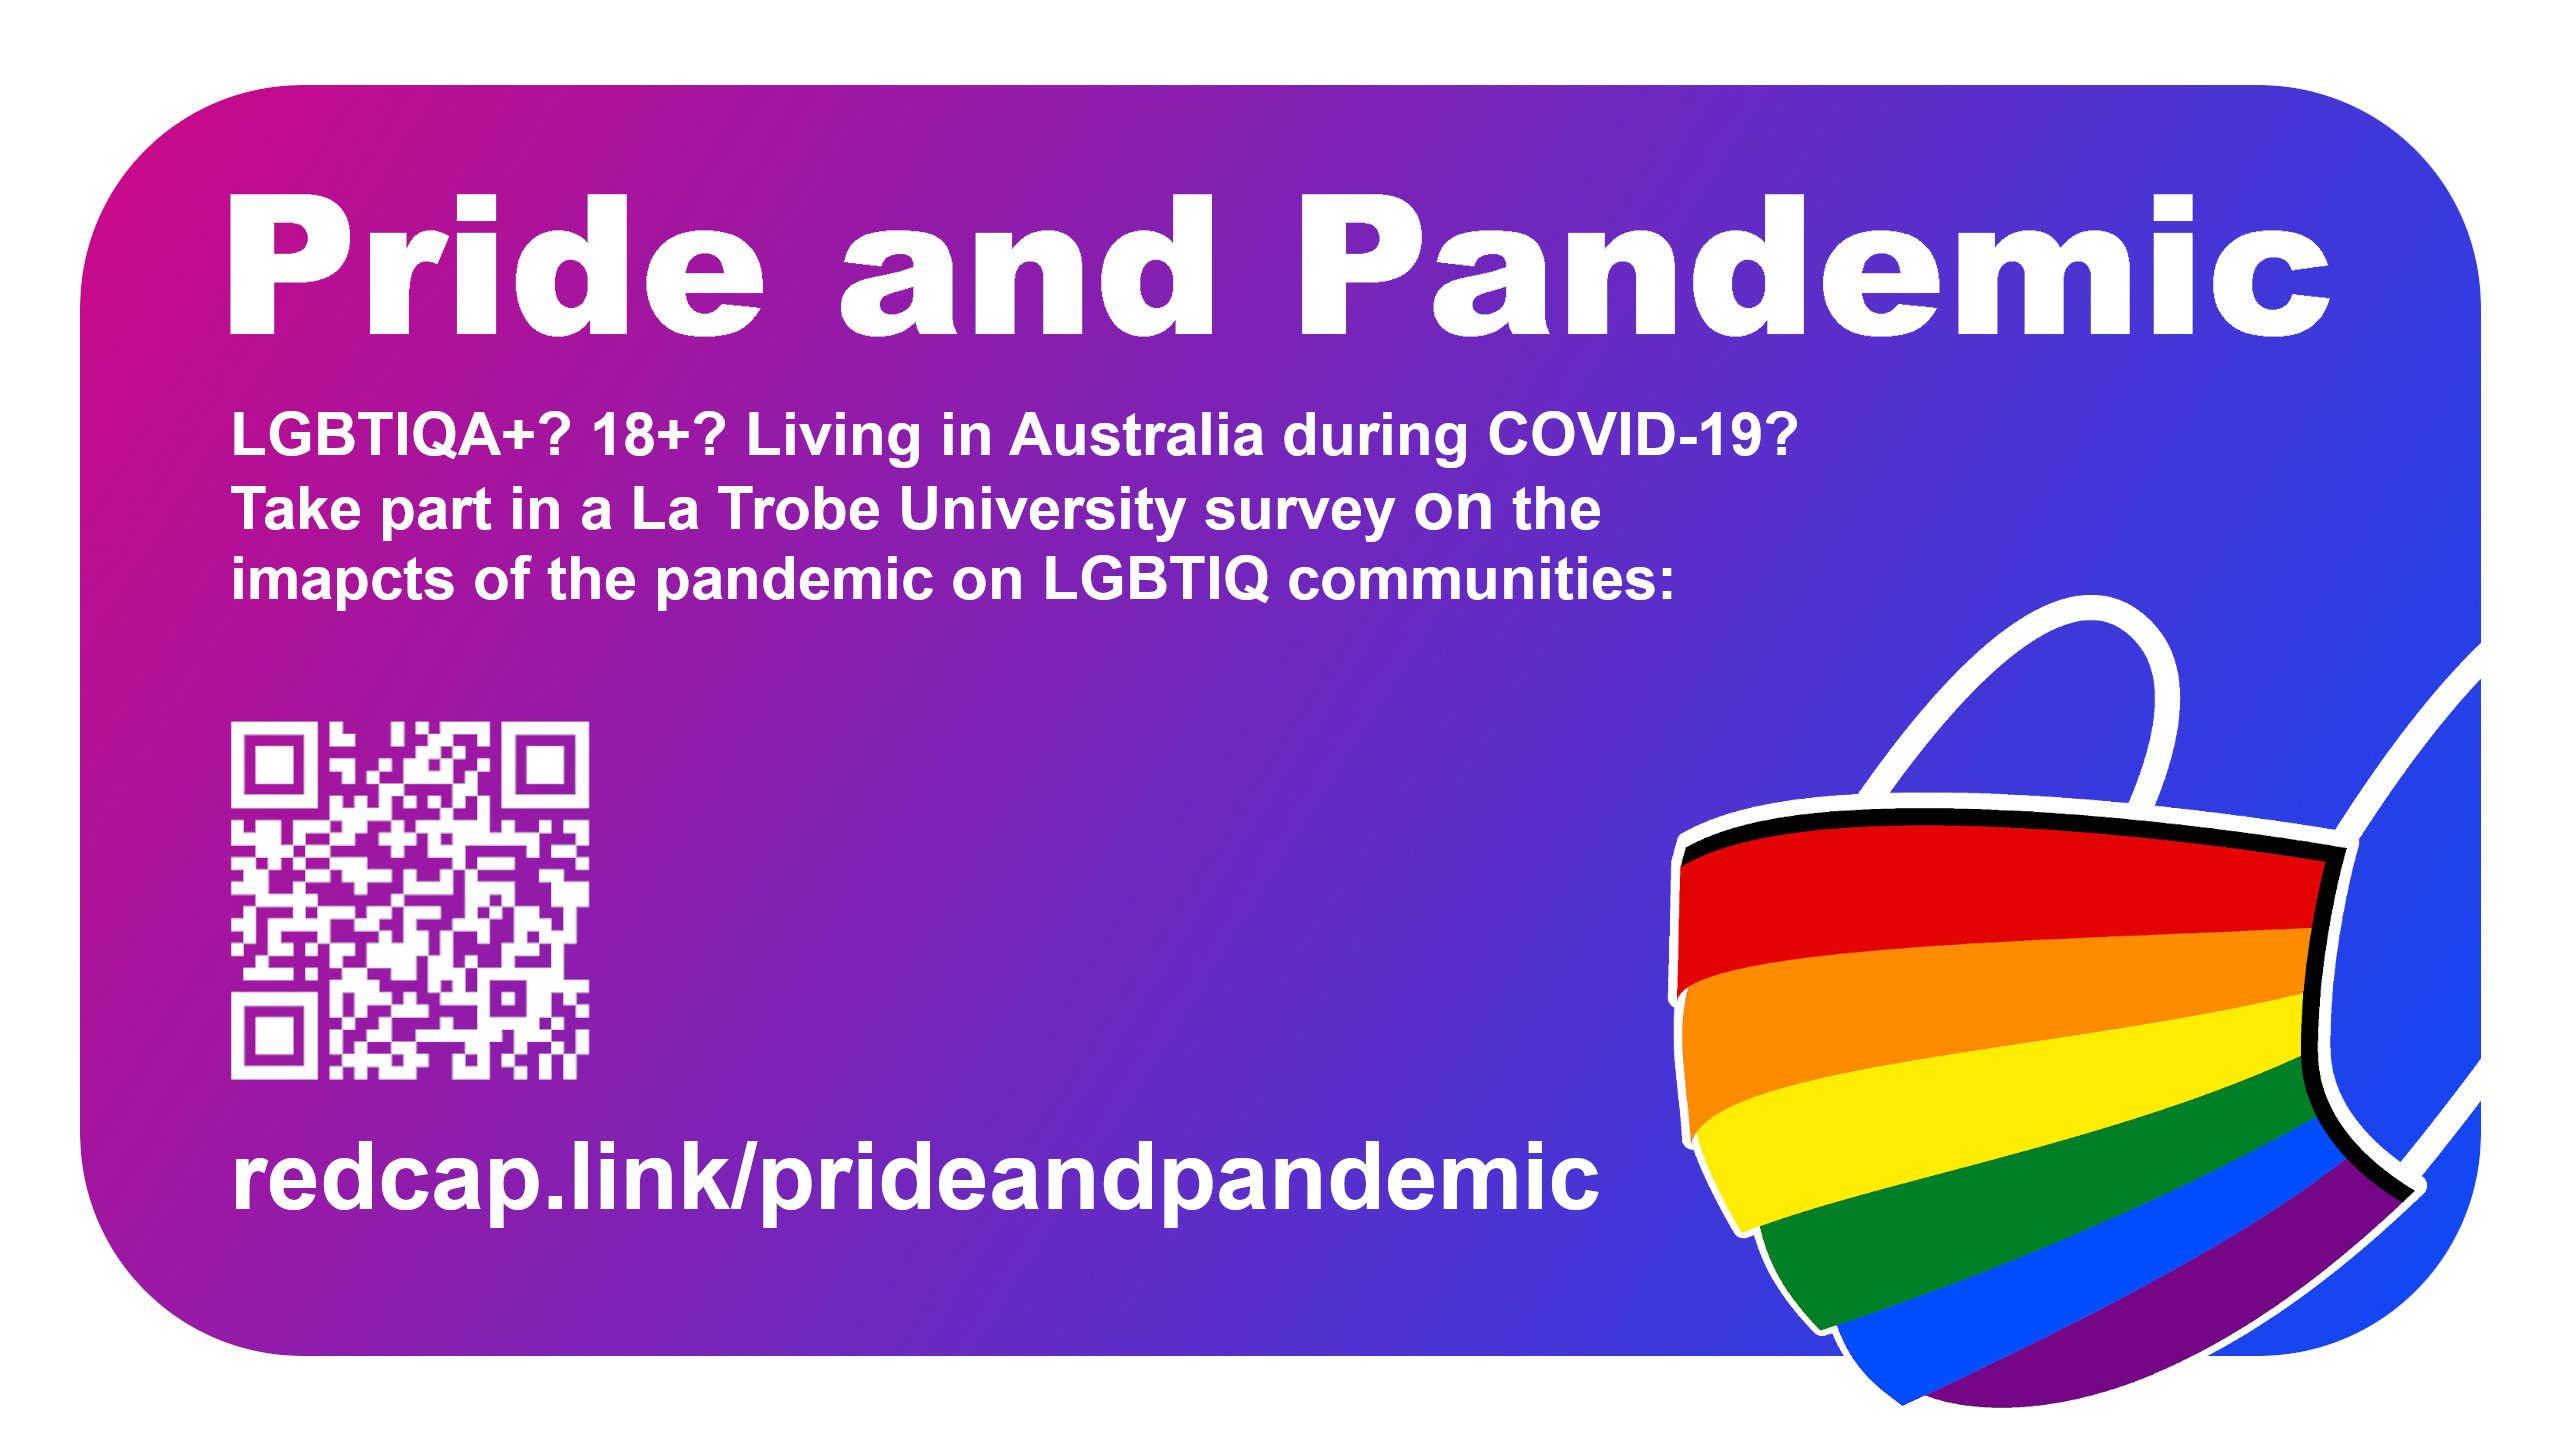 Text 'Pride and Pandemic - LGBTIQA+? 18+? Living in Australia during COVID-19? Take part in a La Trobe University study exploring the impacts of the pandemic on LGBTIQ communities - redcap.link/prideandpandemic' with a QR code and a graphic of a rainbow face mask, all on a purple-to-blue gradient background